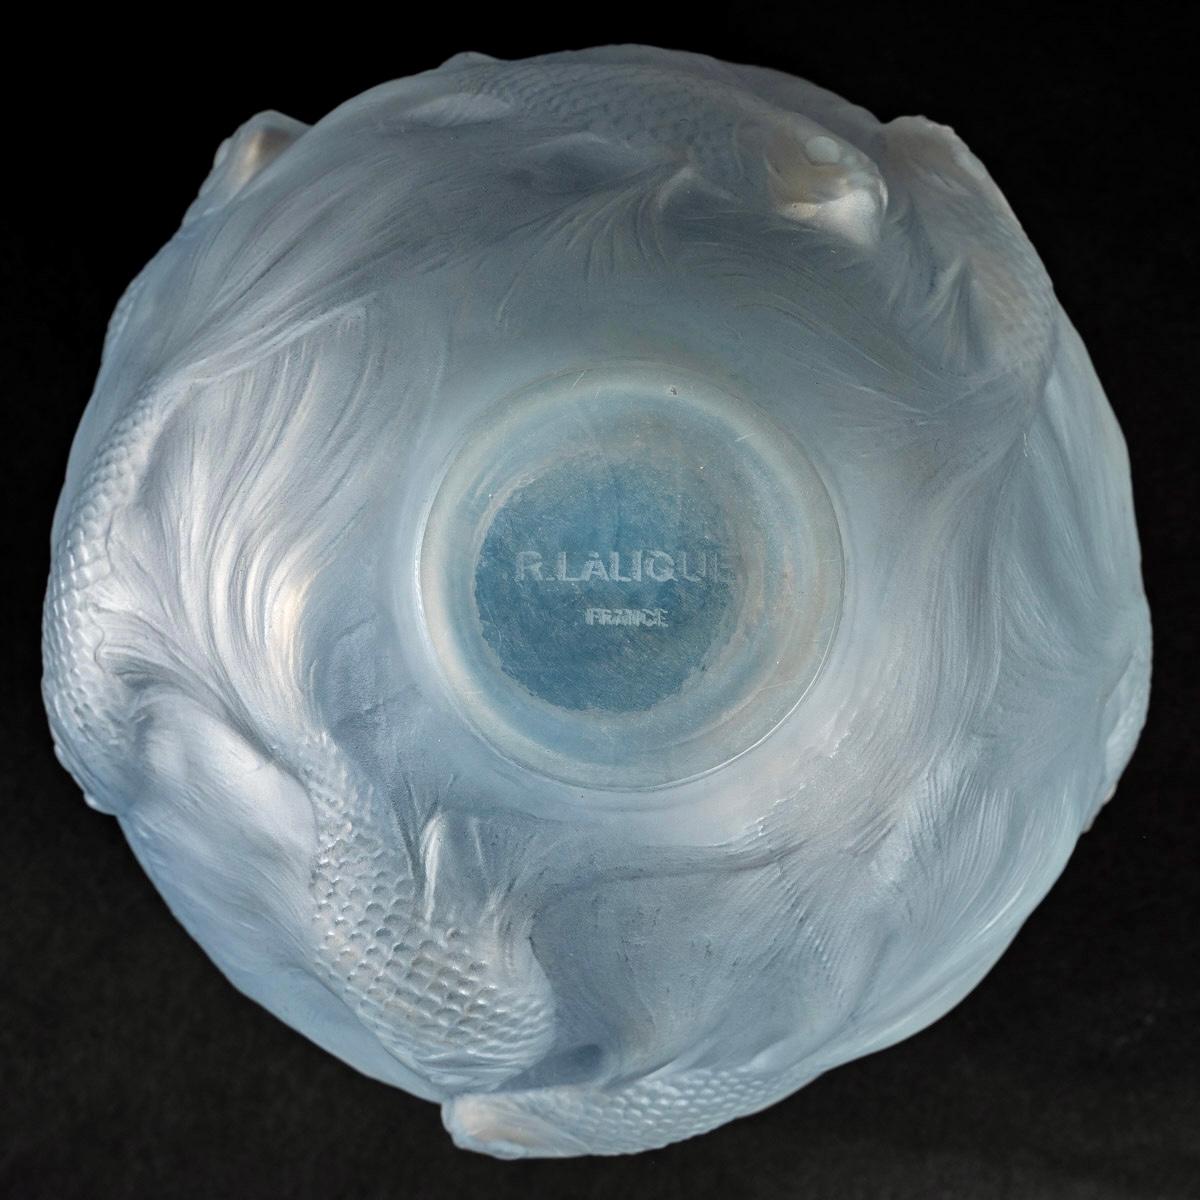 Molded 1924 Rene Lalique Formose Vase in Double Cased Opalescent Glass with Blue Stain